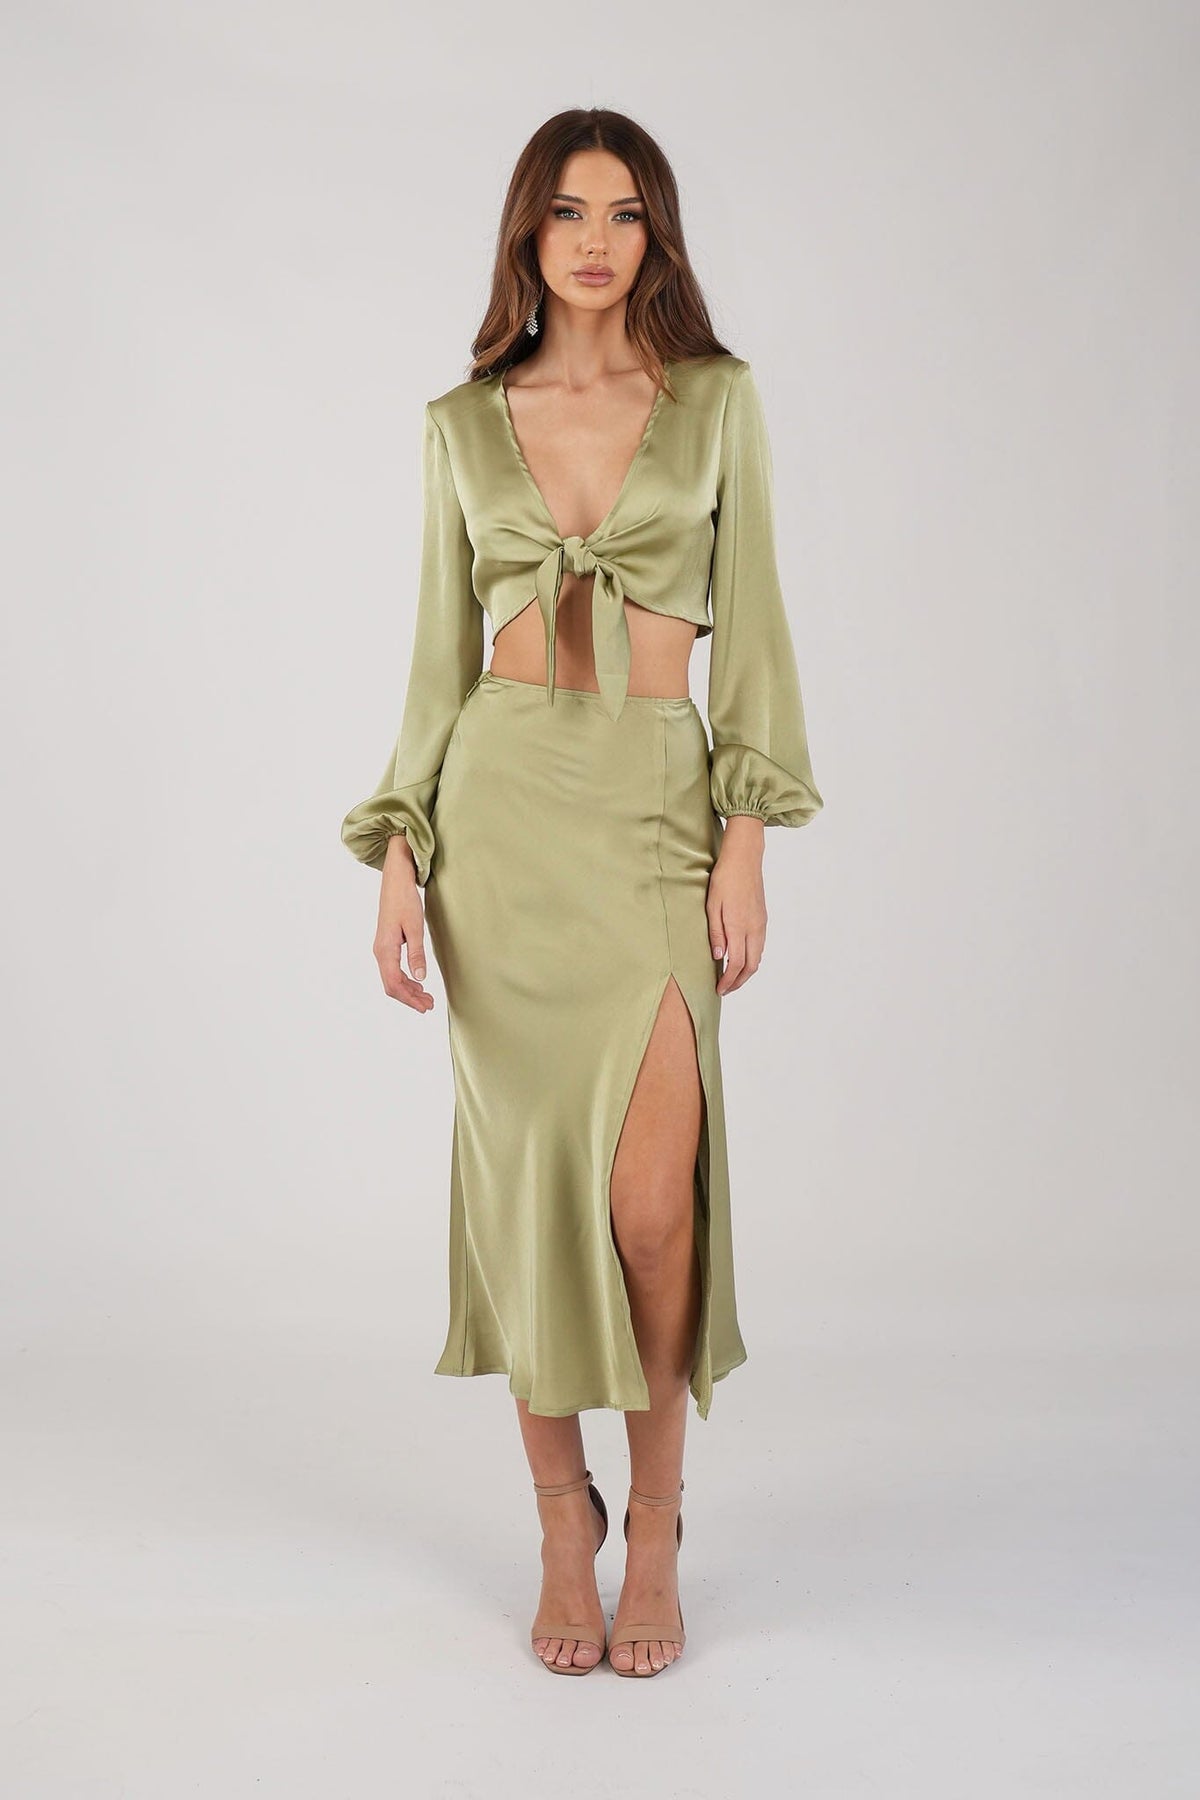 Satin Two-Piece Set including Long Sleeve V Neck Front Tie Crop Top and Midi Skirt with Split in Olive Green